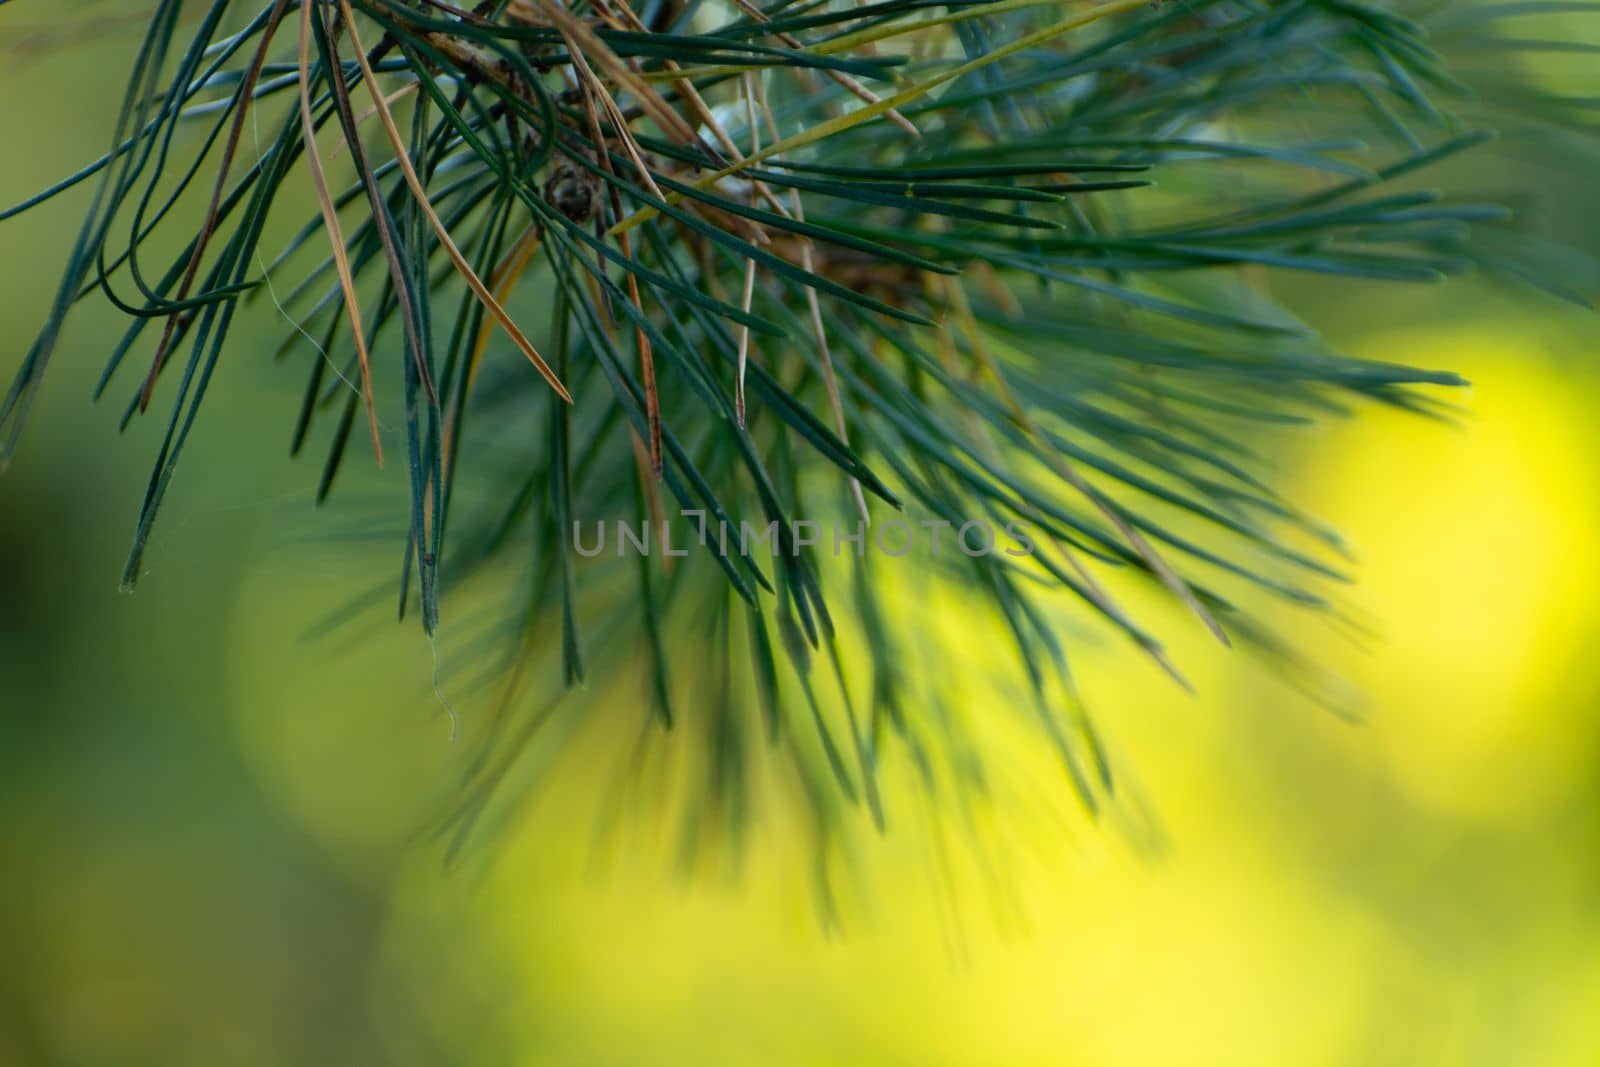 Abstract sprig of spruce on a sunlit background by darekb22